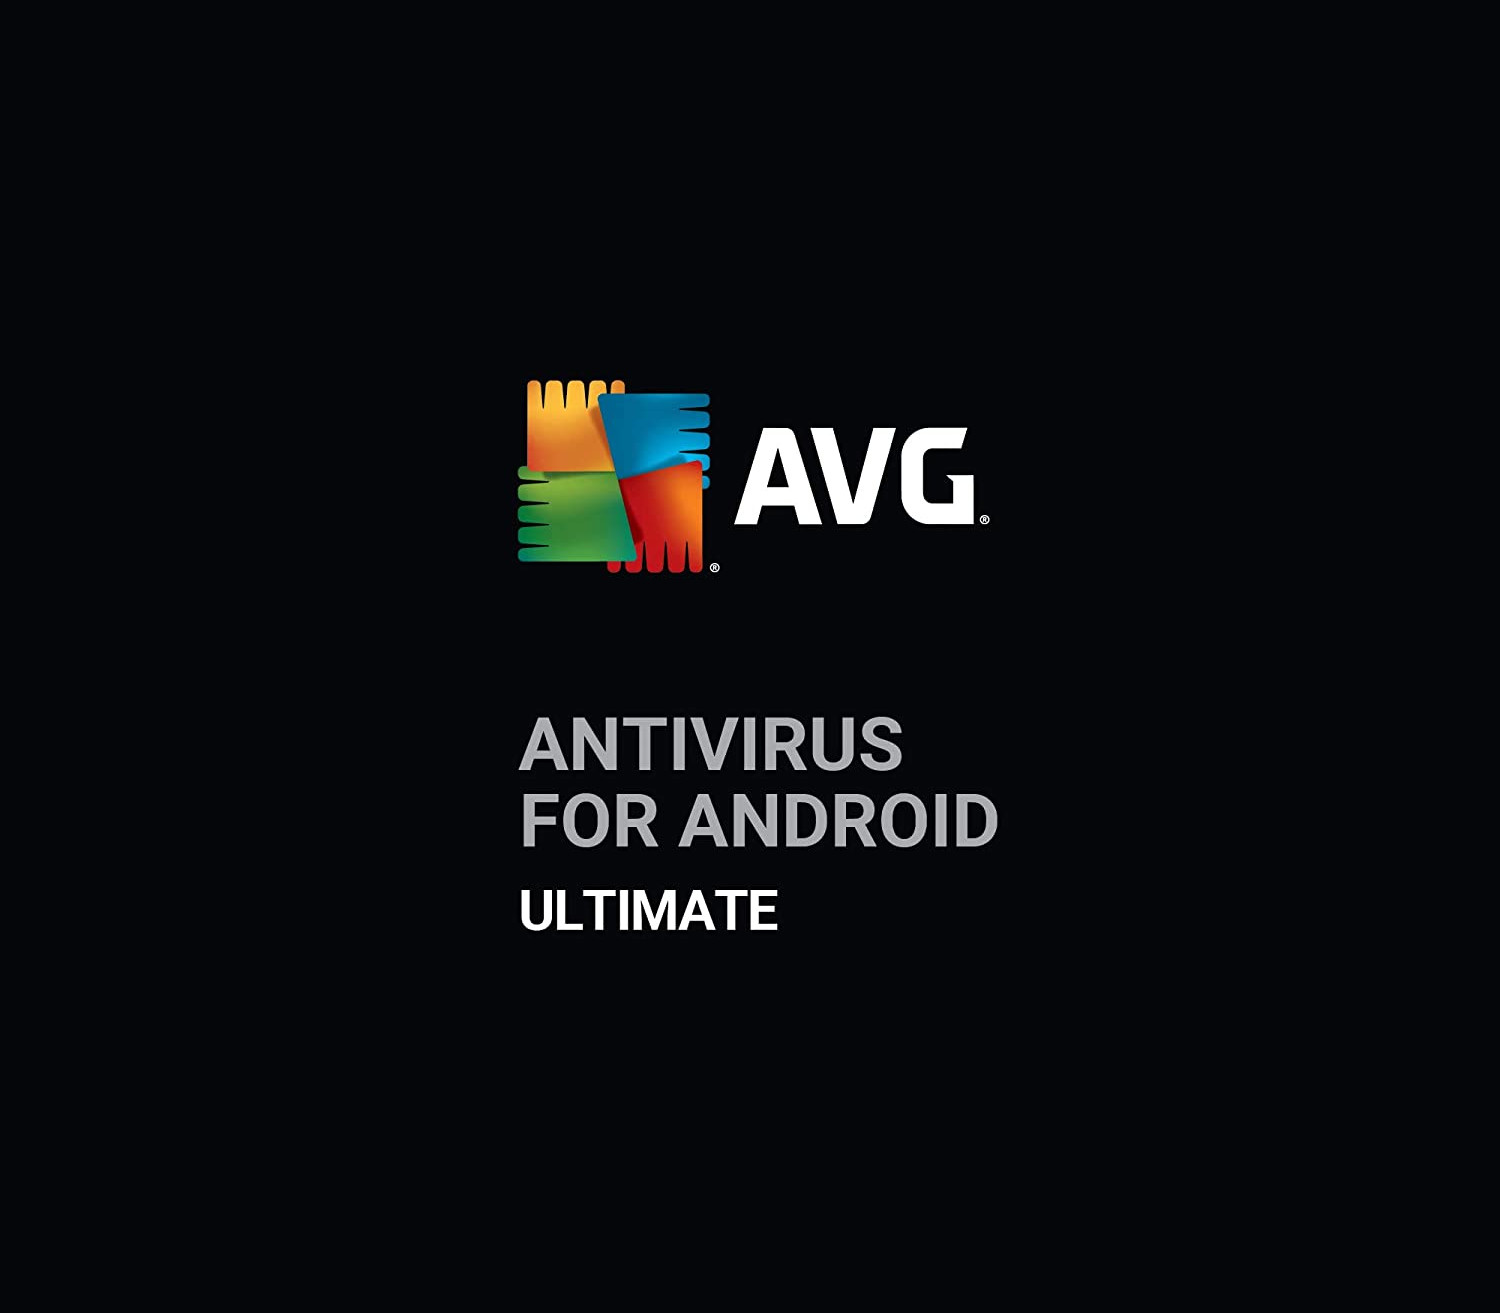 (6.84$) AVG Antivirus for Android - Ultimate Key (1 Year / 1 Device)